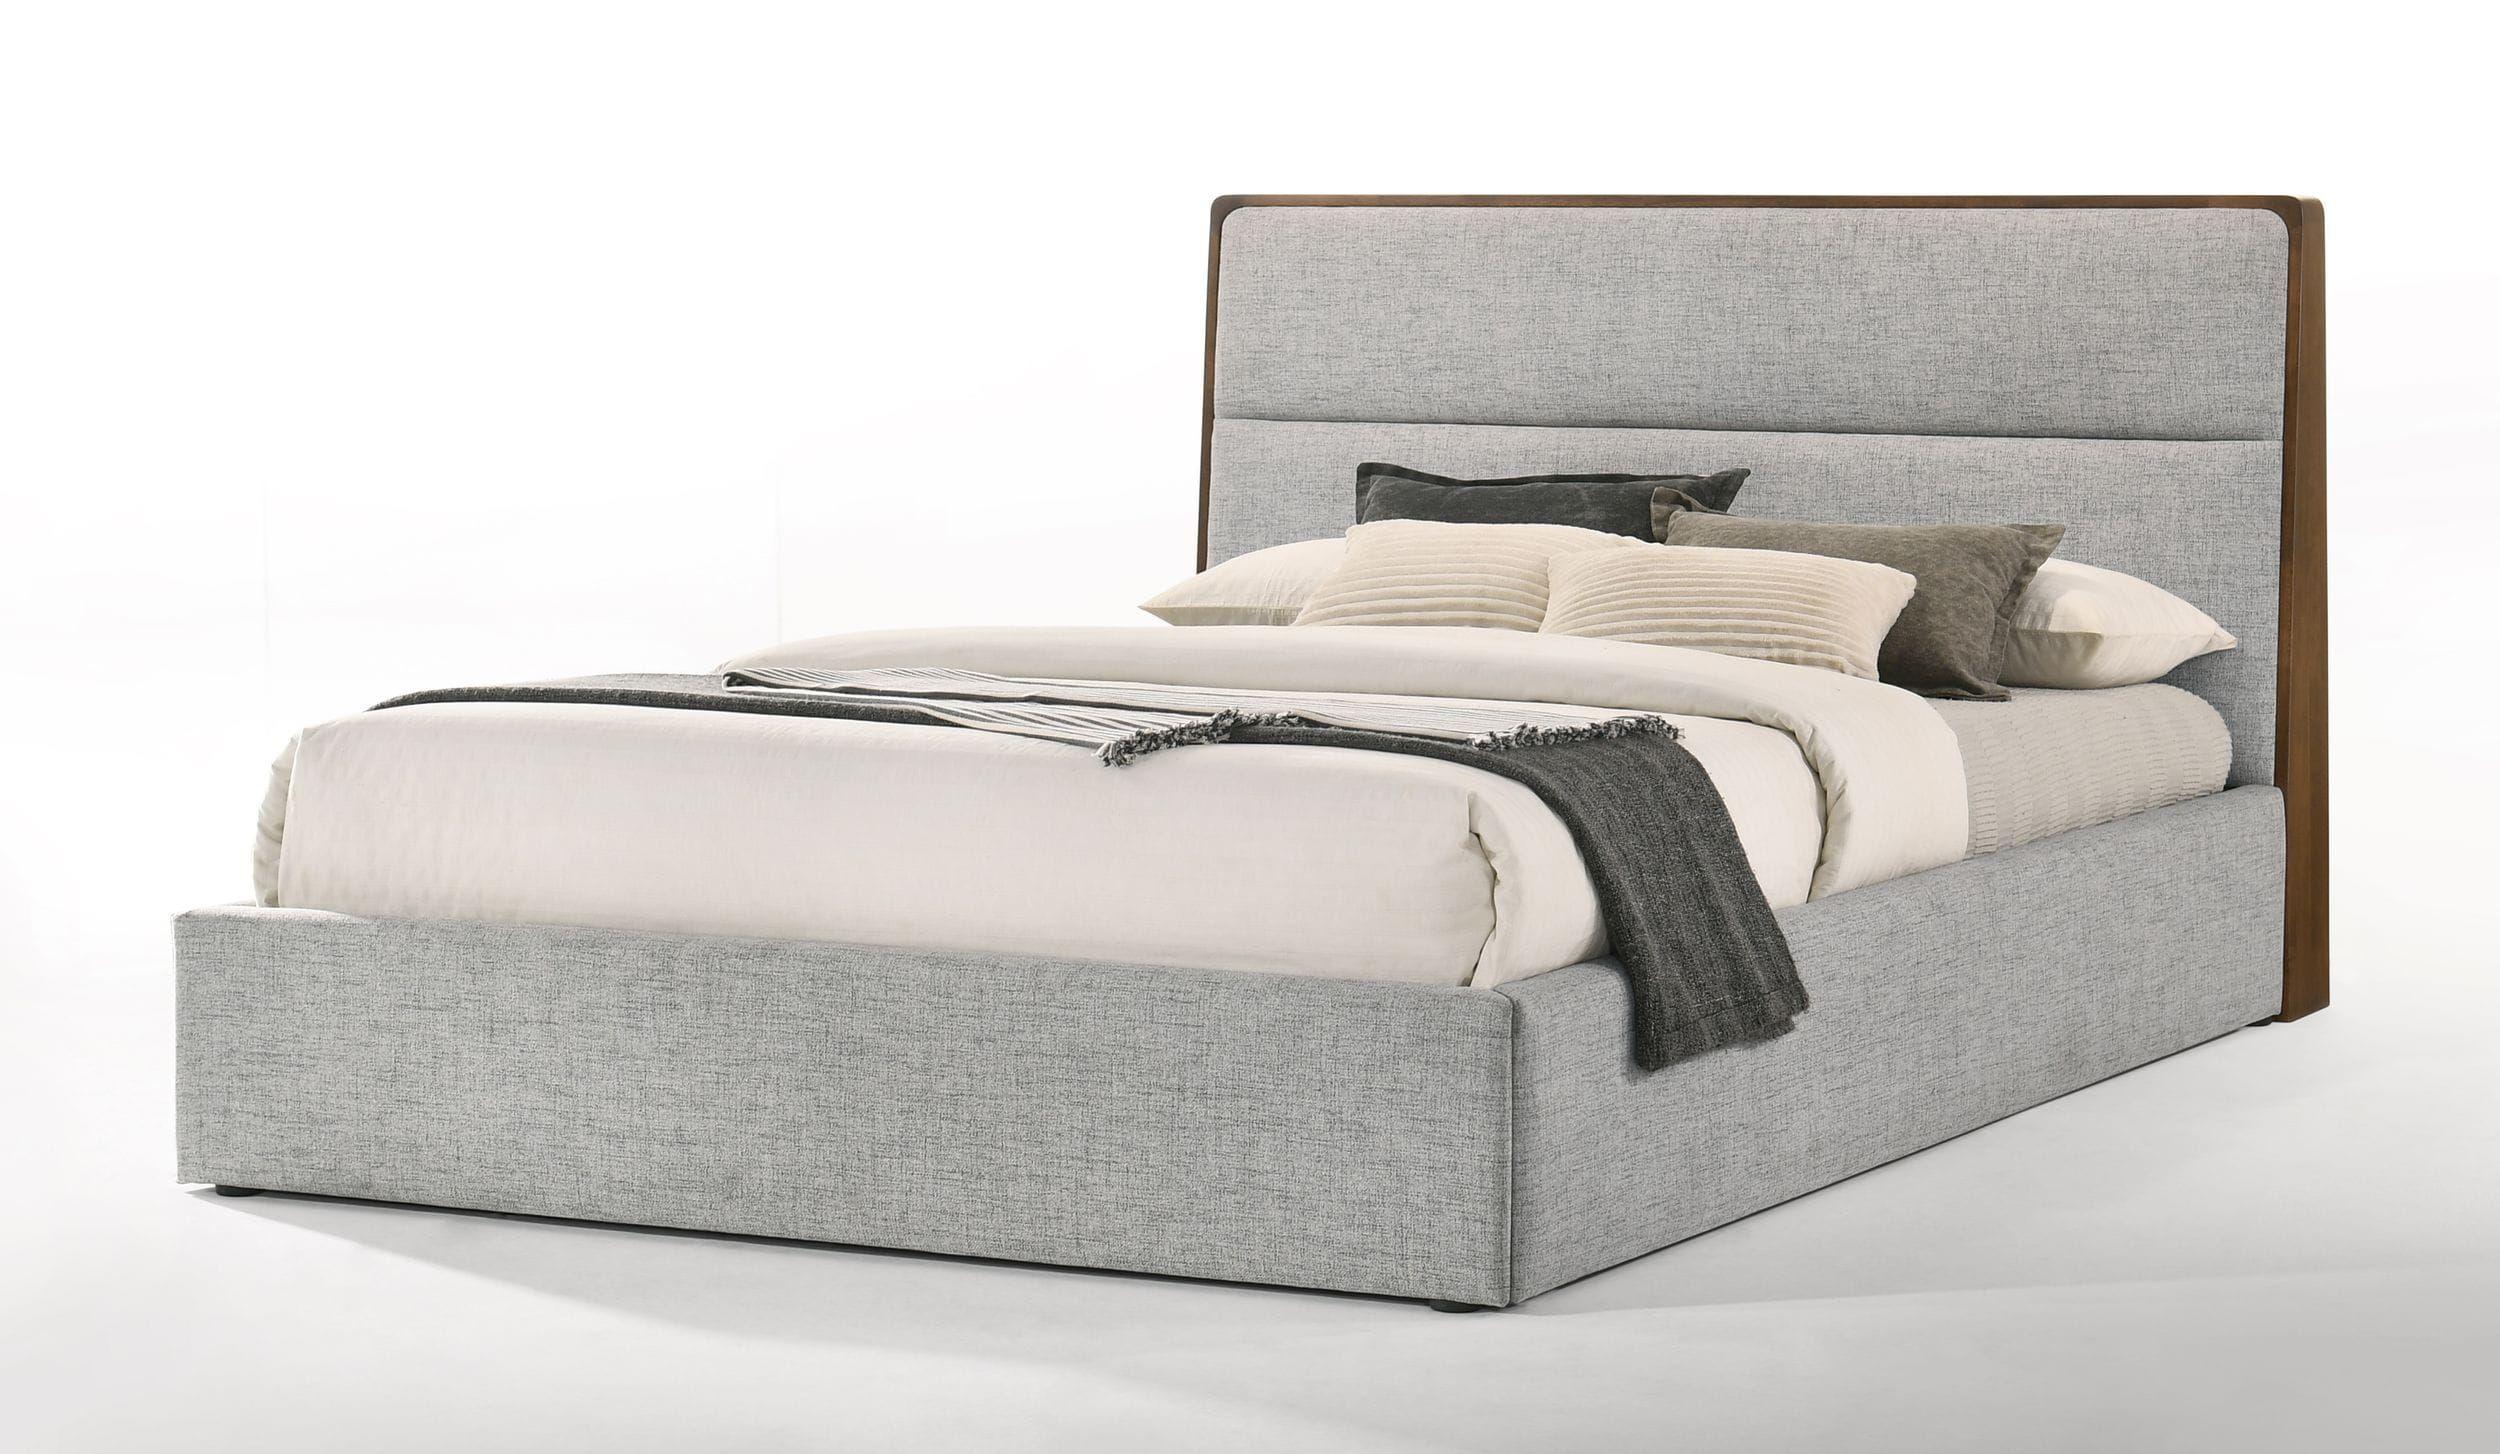 Contemporary, Modern Platform Bed Dustin VGMABR-99-BED in Walnut, Gray Fabric